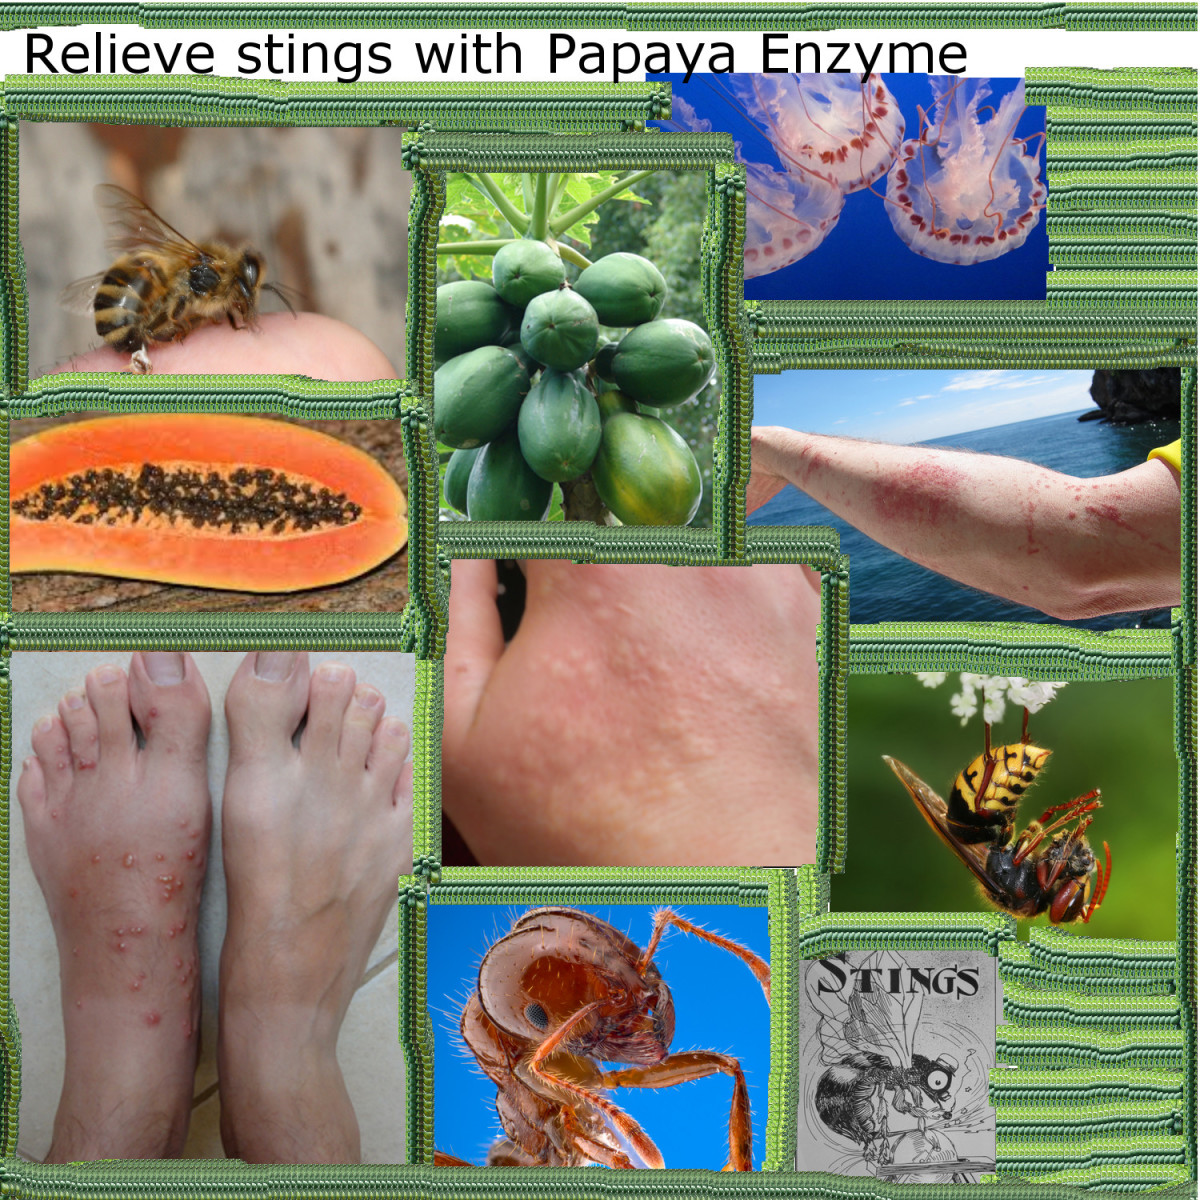 papaya, papaya enzyme, relief for stings, bee stings, wasp stings, jellyfish stings, ant bites, fire ant bites, mosquito bites, natural remedies 